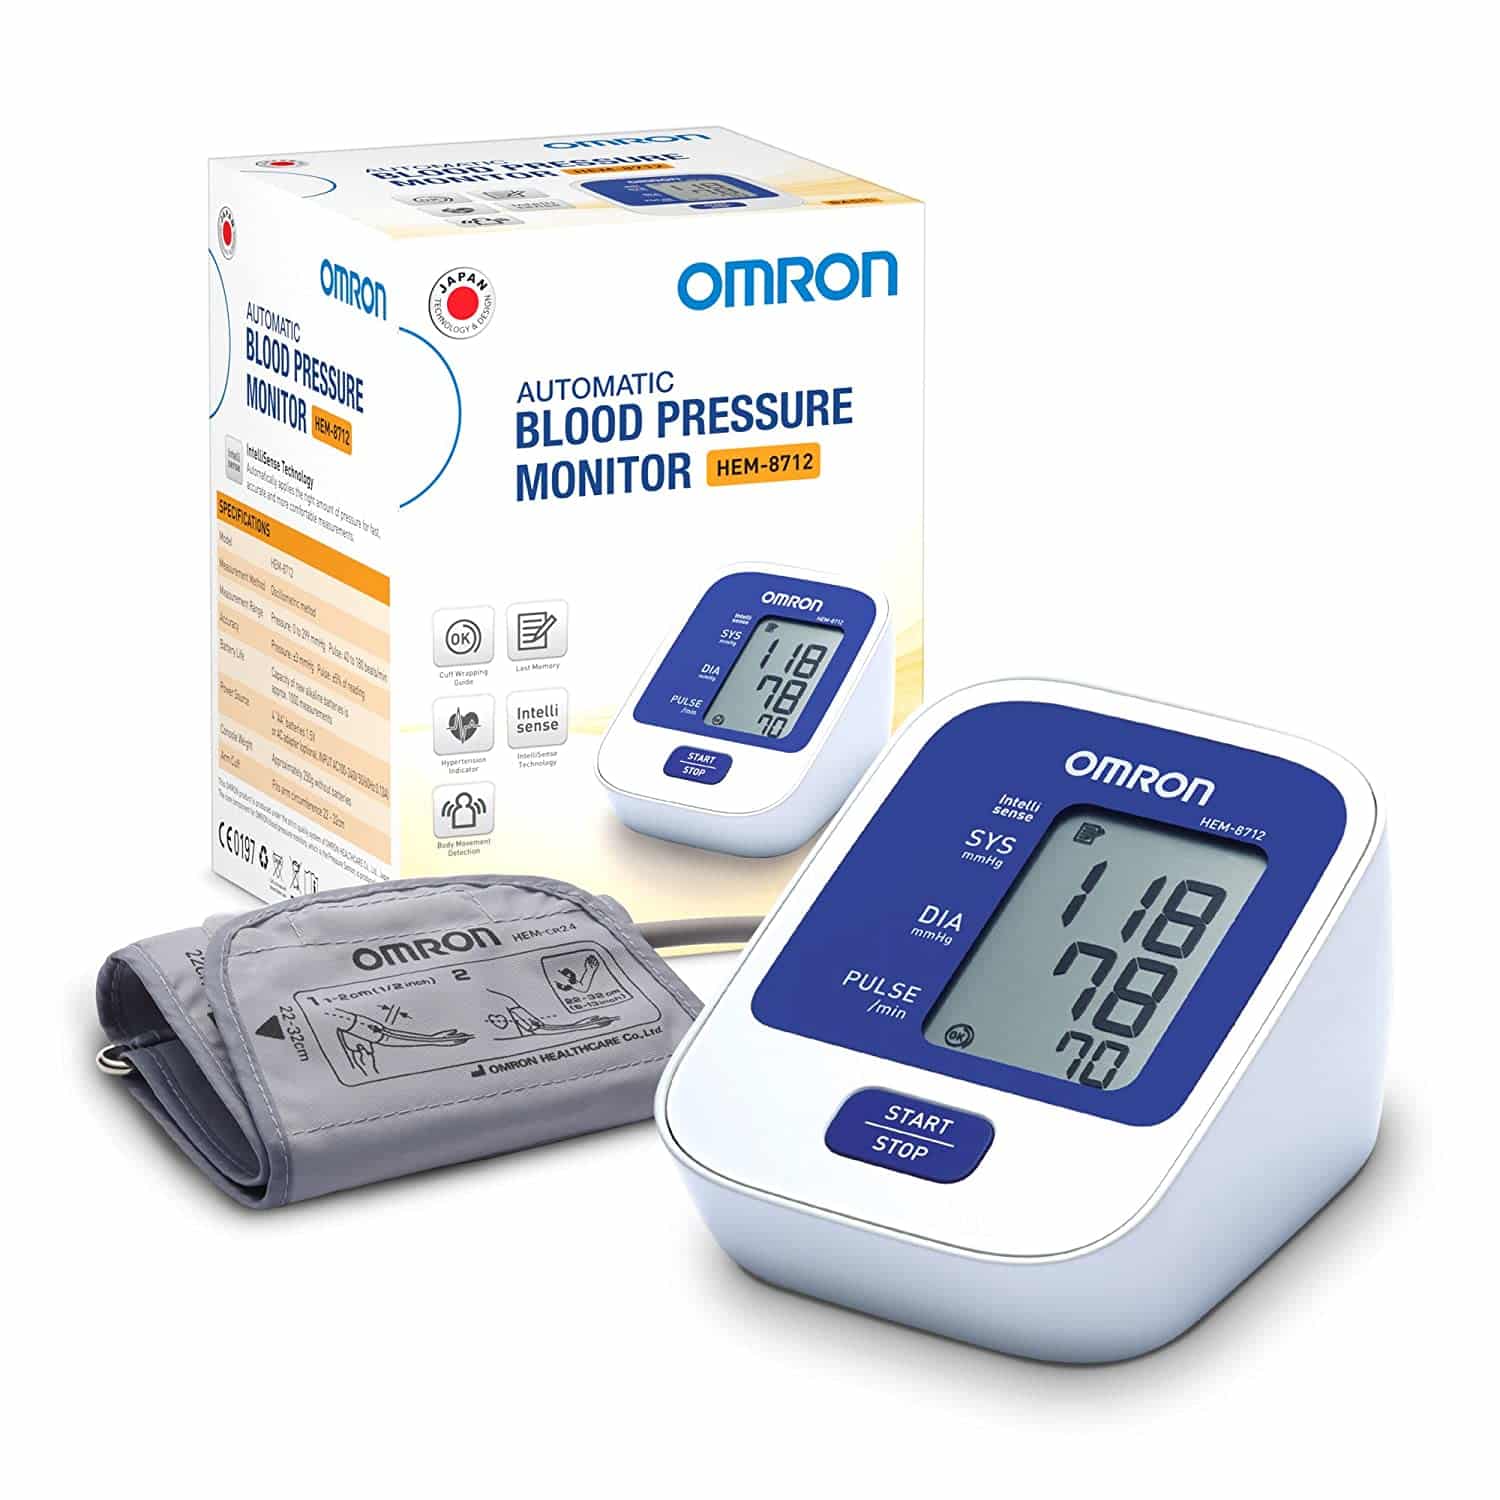 Omron-8712-Automatic-Blood-Pressure-Monitor-White-and-Blue.jpg